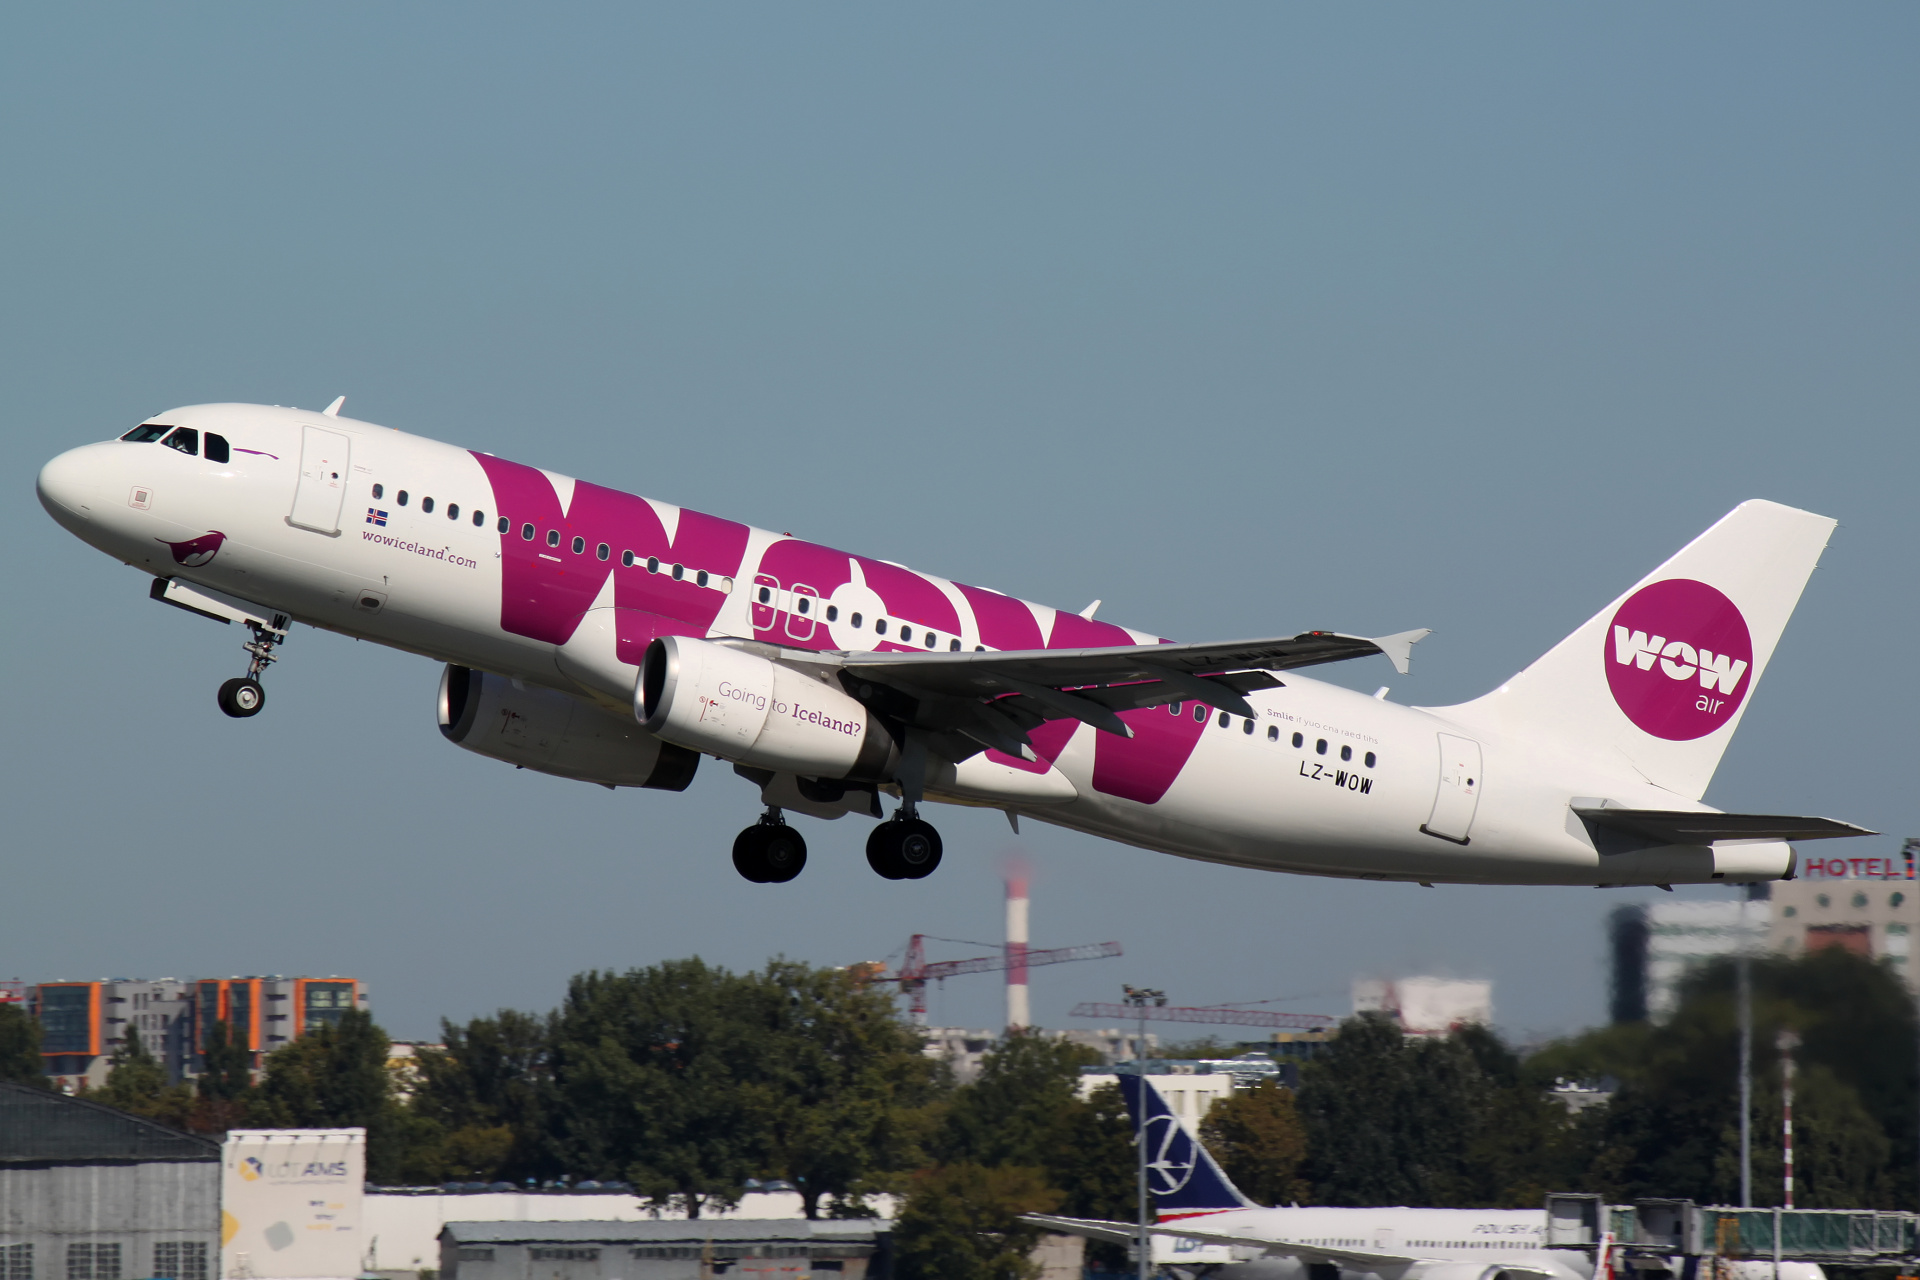 LZ-WOW, WOW Air (Aircraft » EPWA Spotting » Airbus A320-200)